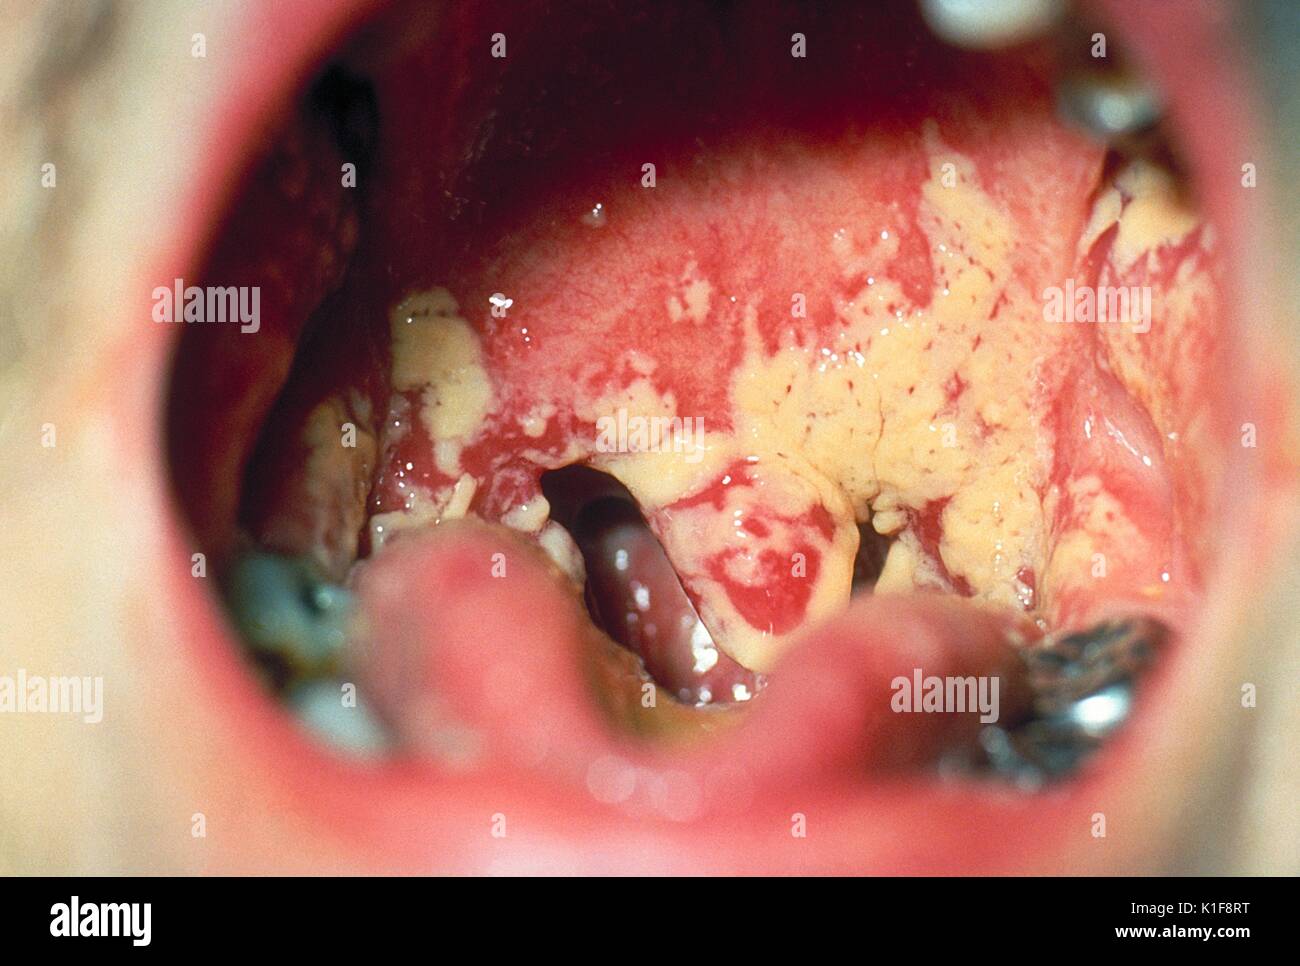 Oral thrush. Aphthae. Candida albicans . Image courtesy CDC. 1990. Stock Photo